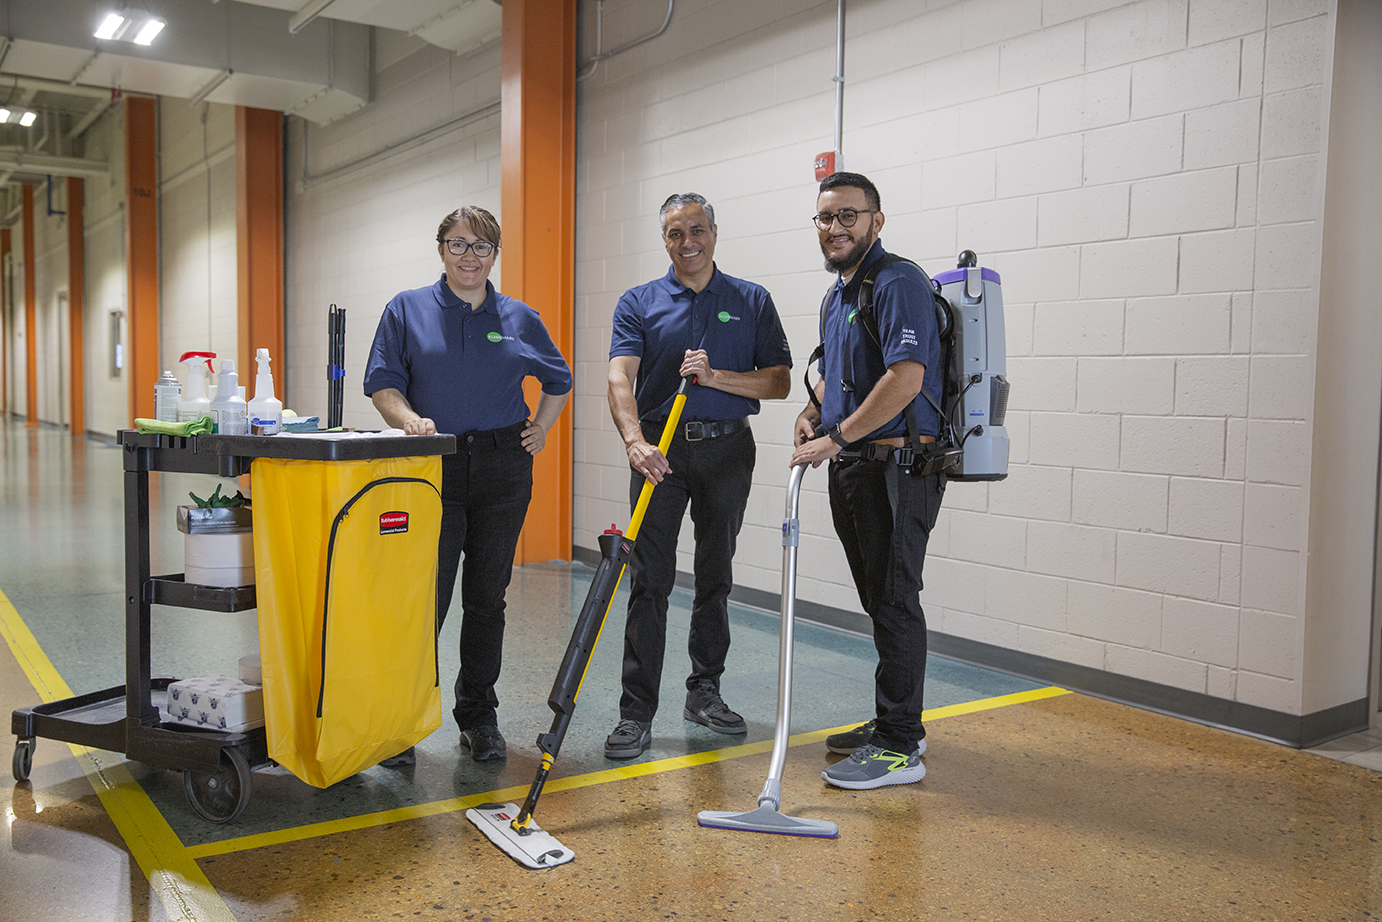 KleenMark offers commercial cleaners services in Madison, WI and across the Midwest!